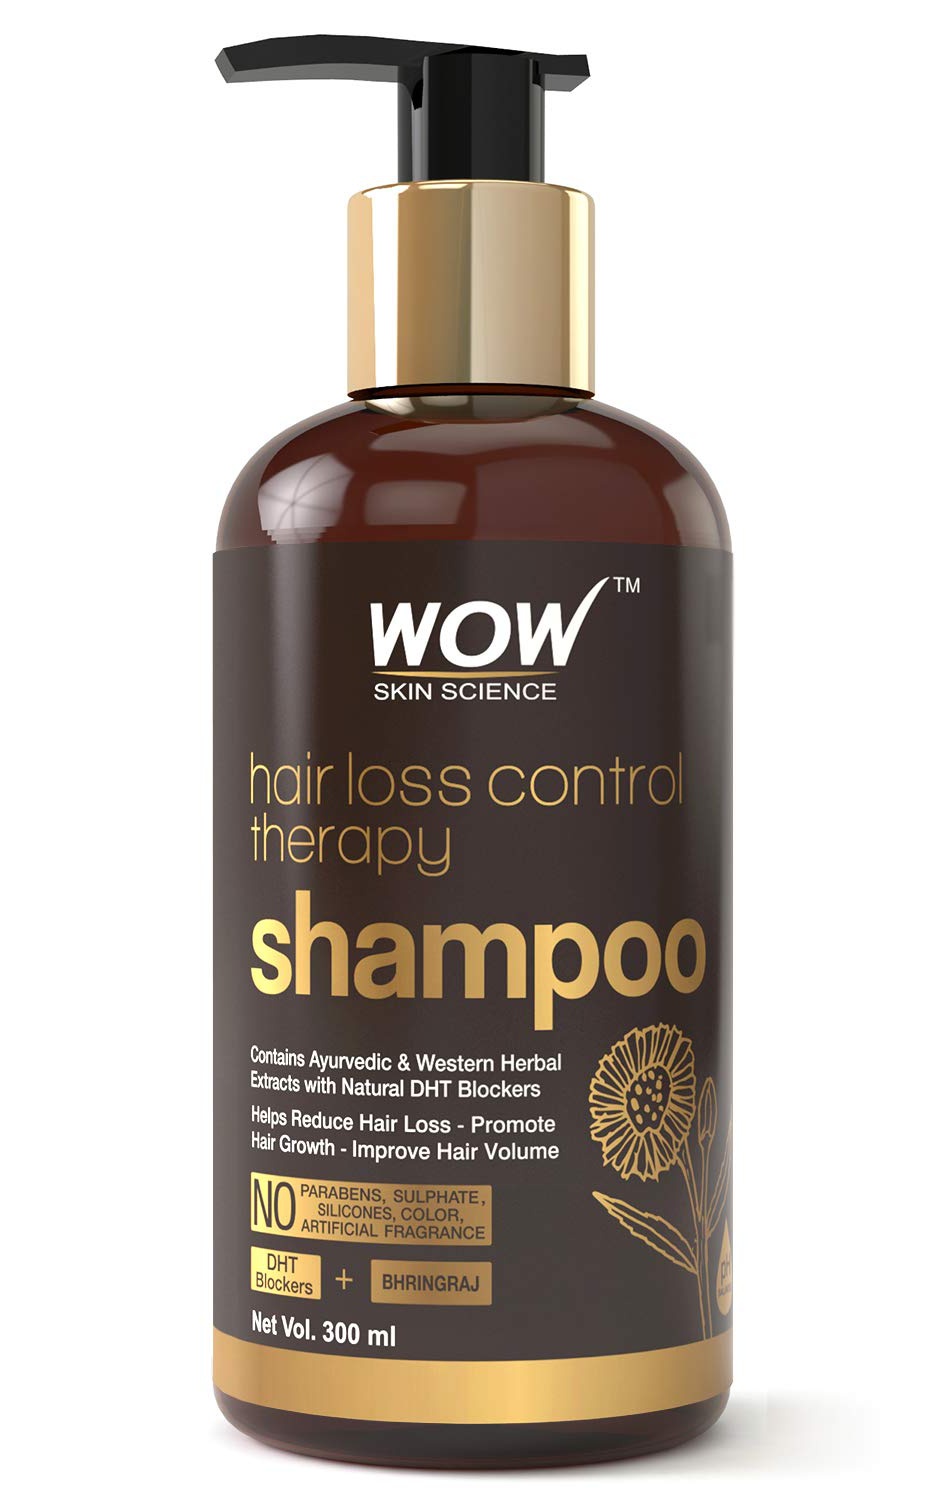 WOW skin science Hair Loss Control Therapy Shampoo